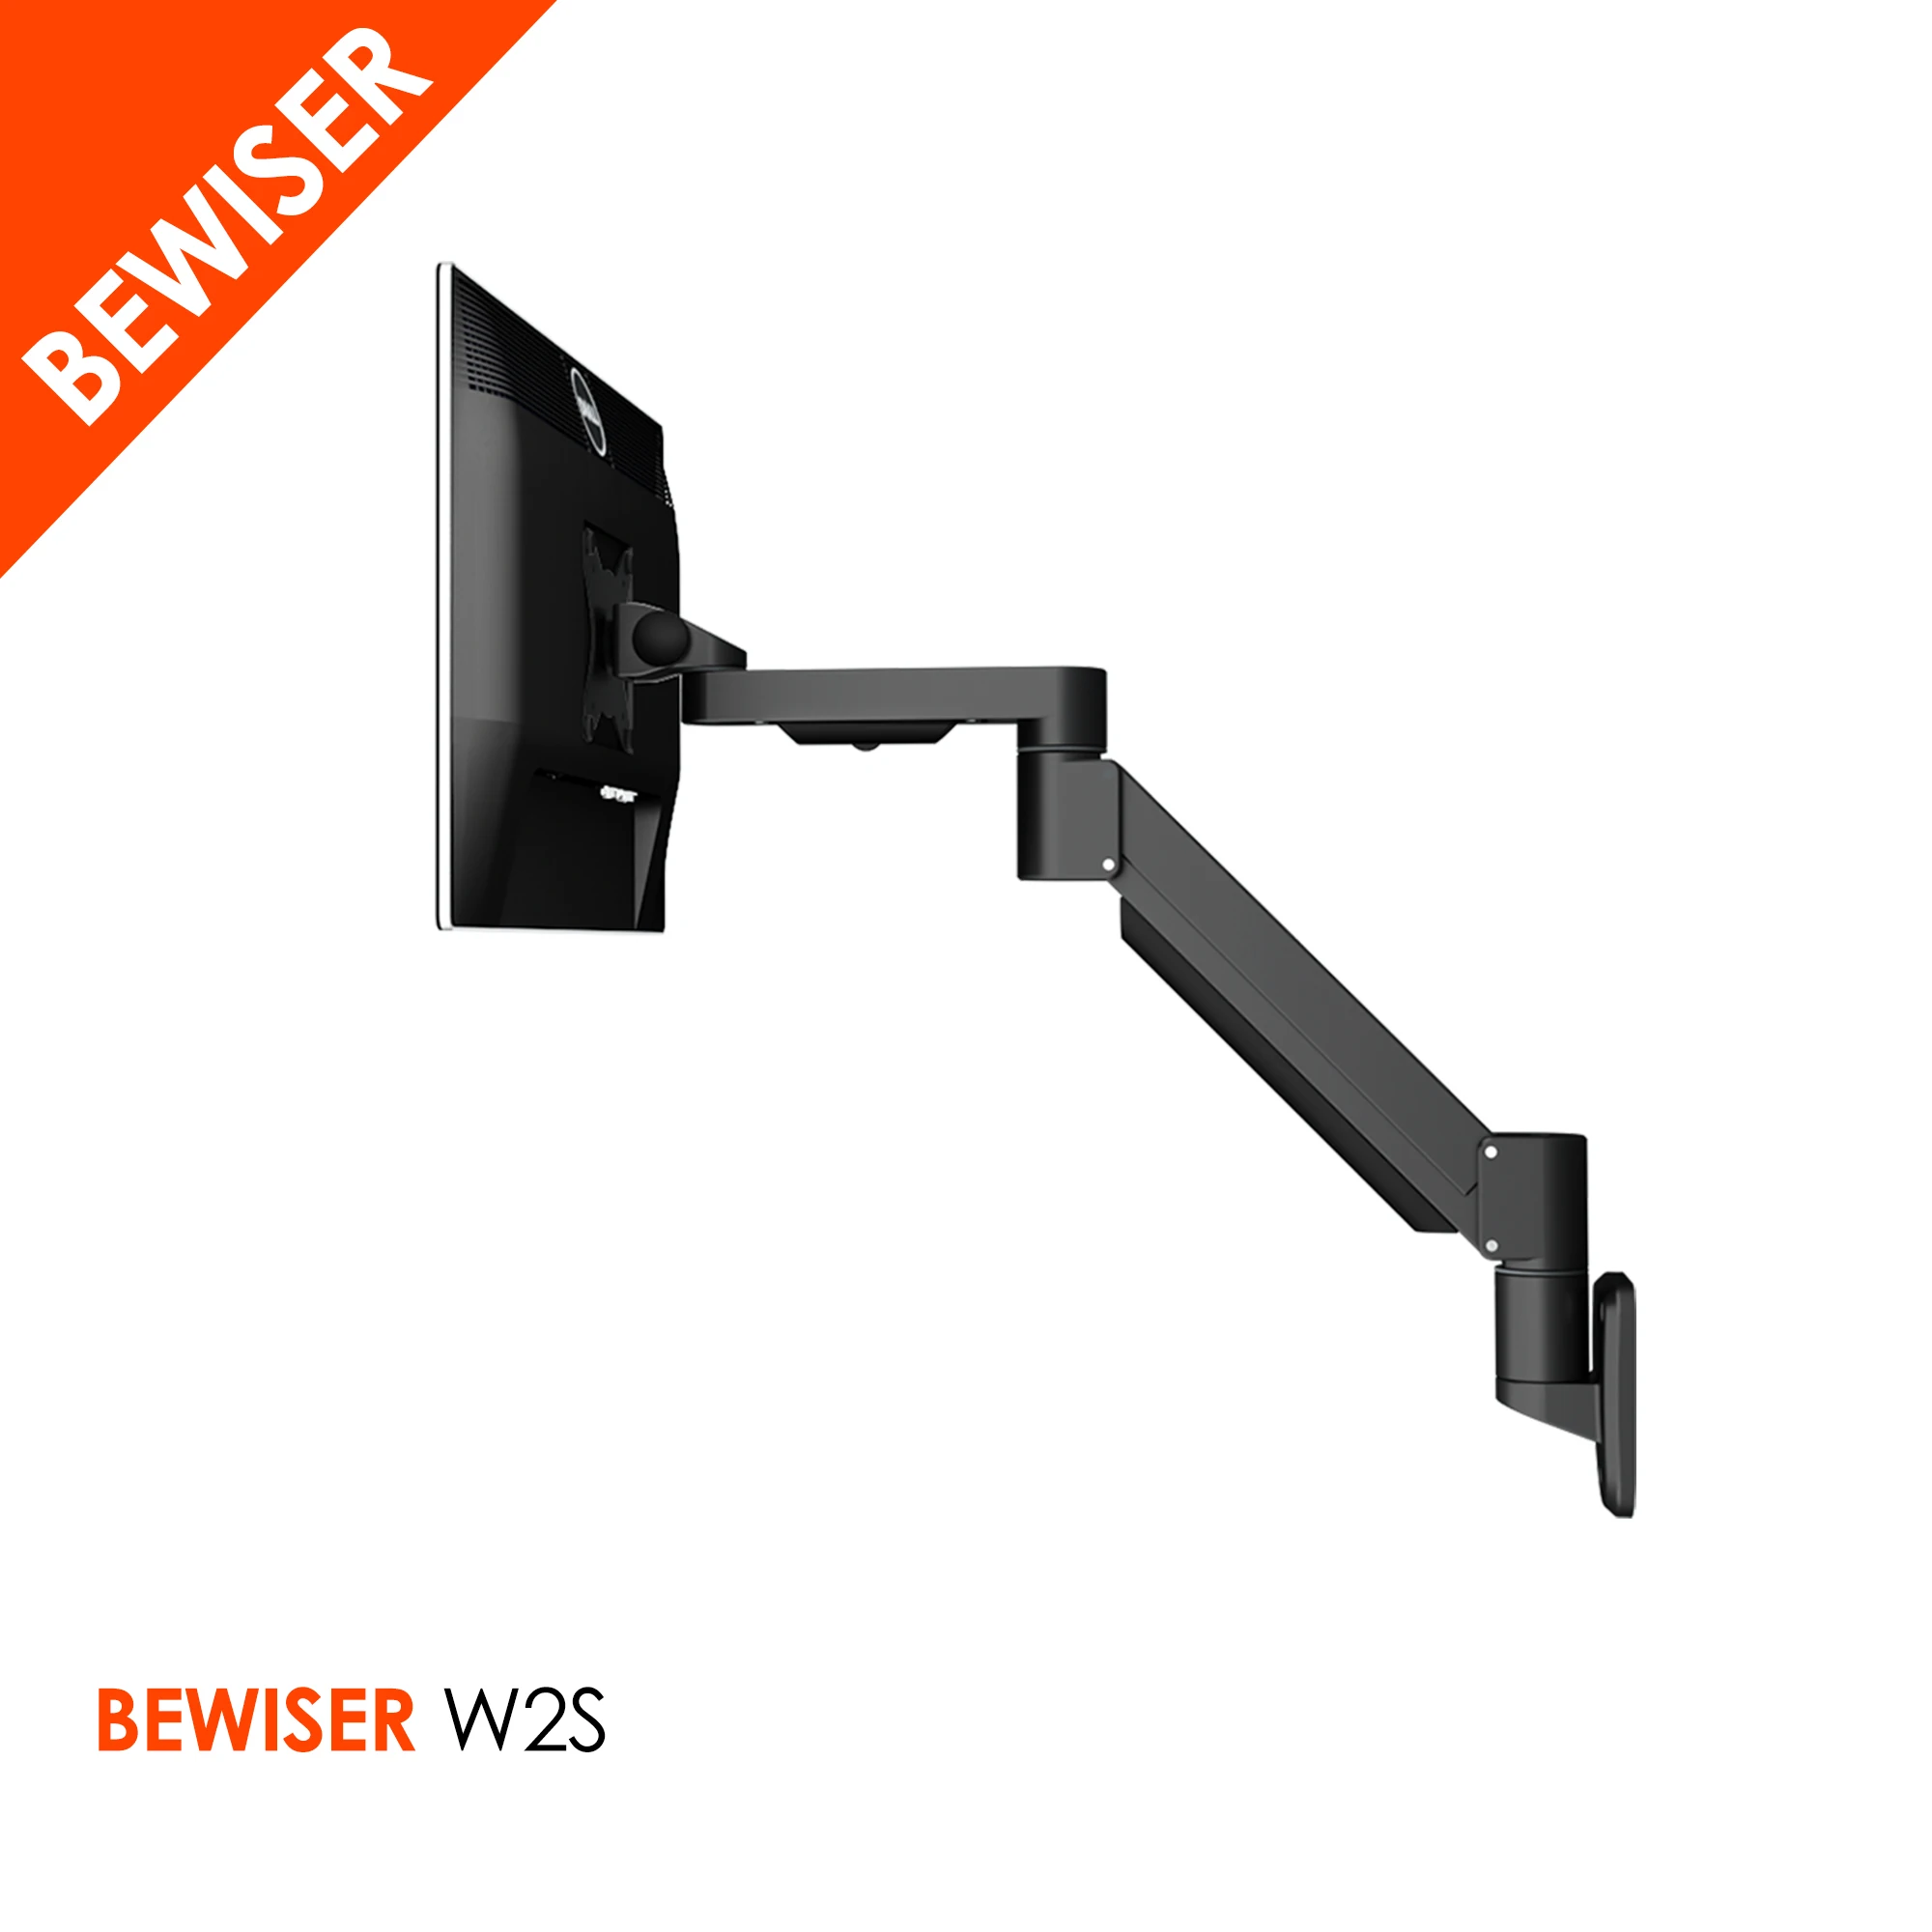 Aluminum alloy gas spring adjustable lcd monitor arm Monitor arm mounted on wall (BEWISER W2S)